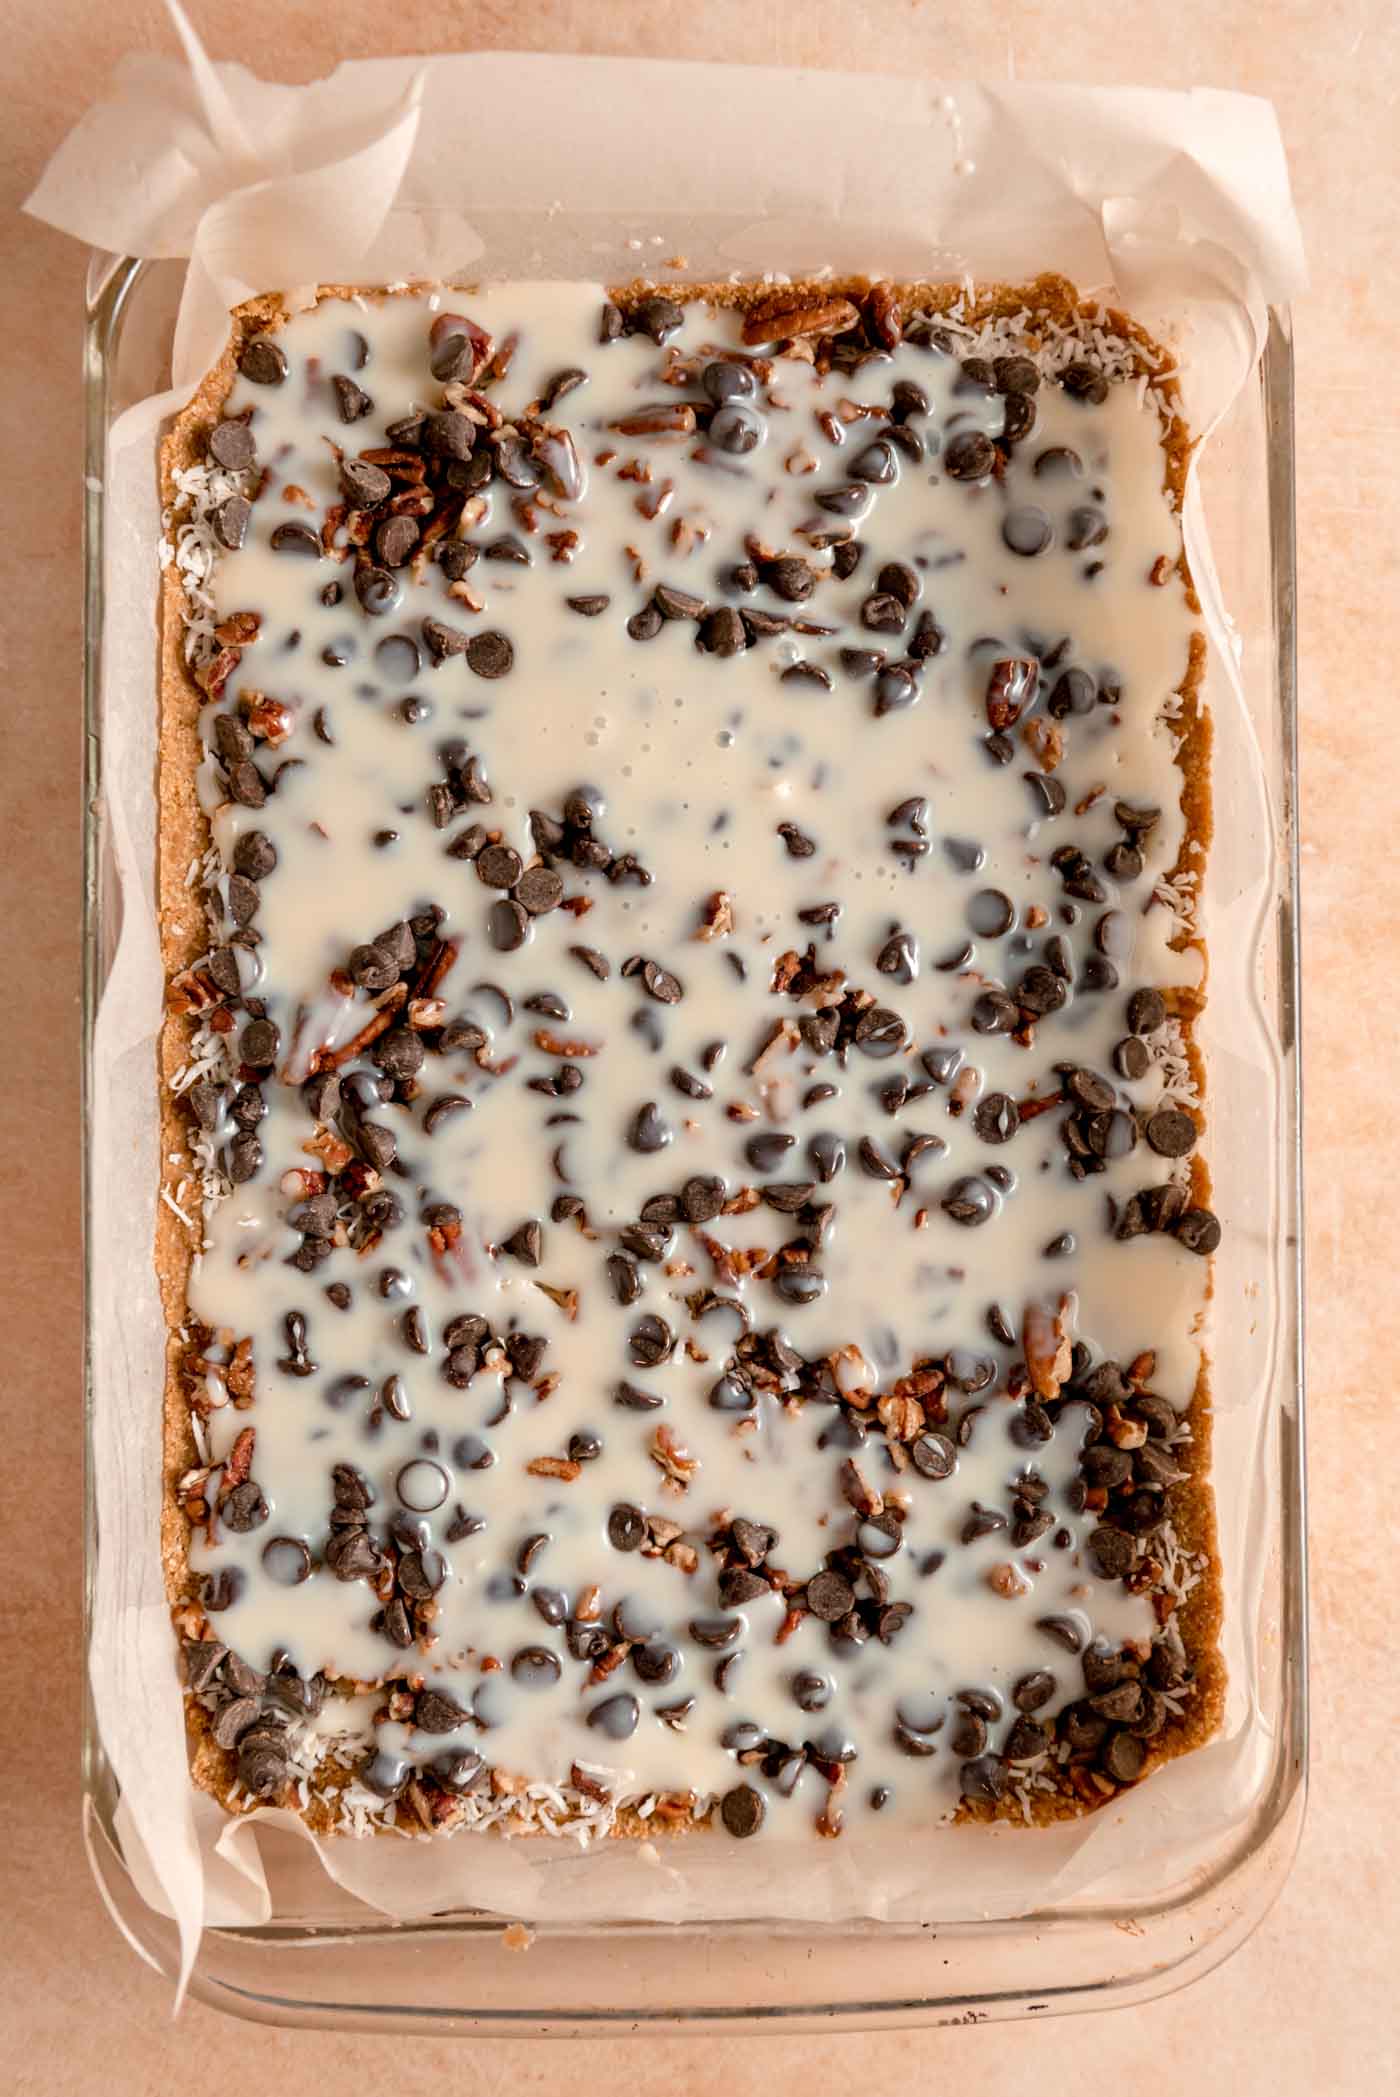 Coconut condensed milk poured into a 9x13-inch glass pan of seven layer magic cookie bars before they've been baked.